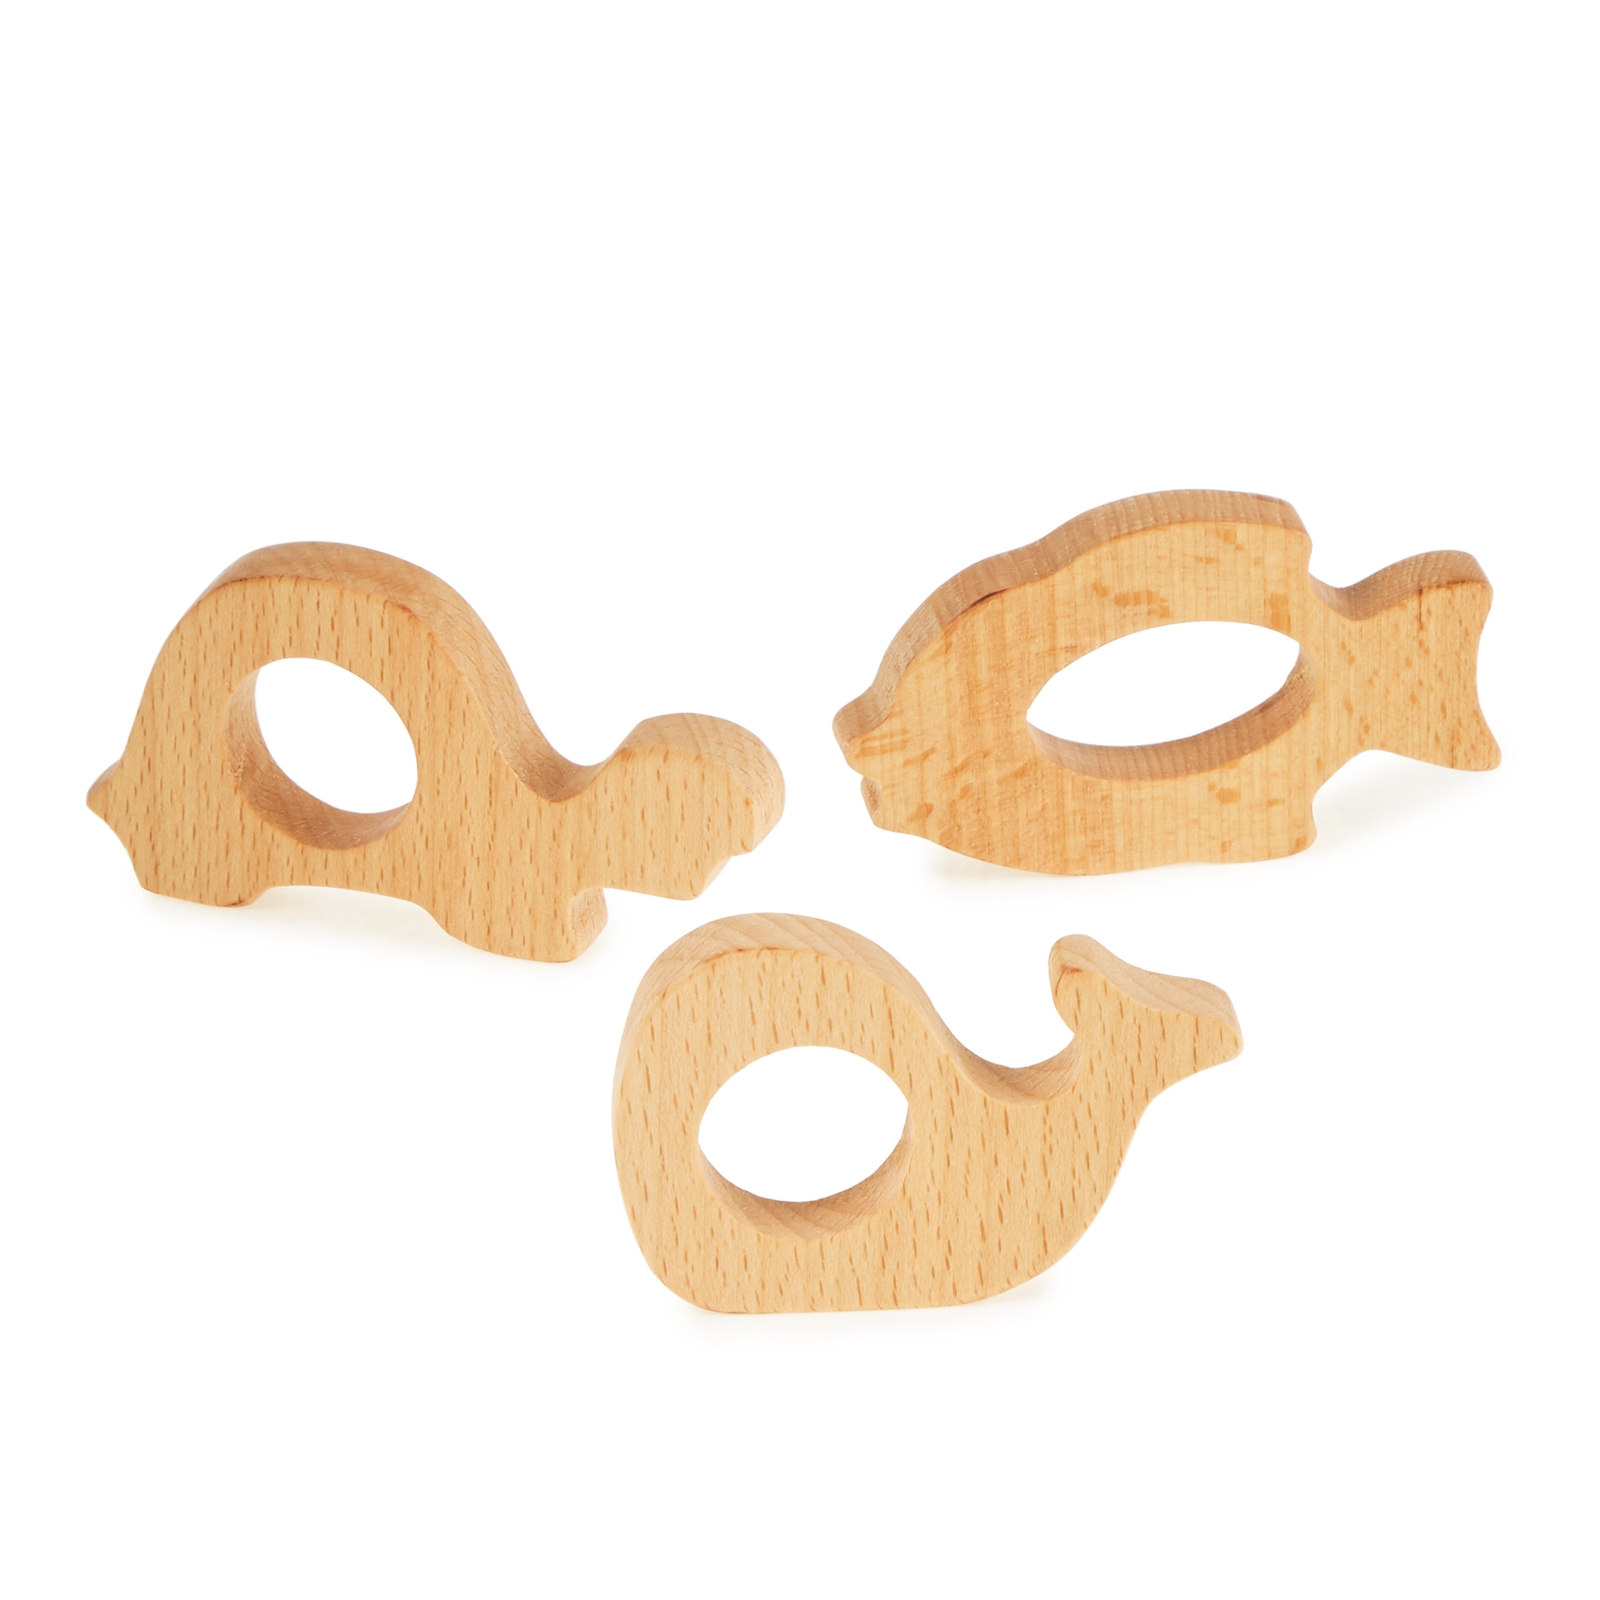 Wooden Sealife Grasping Toys - Assorted - Pack of 3